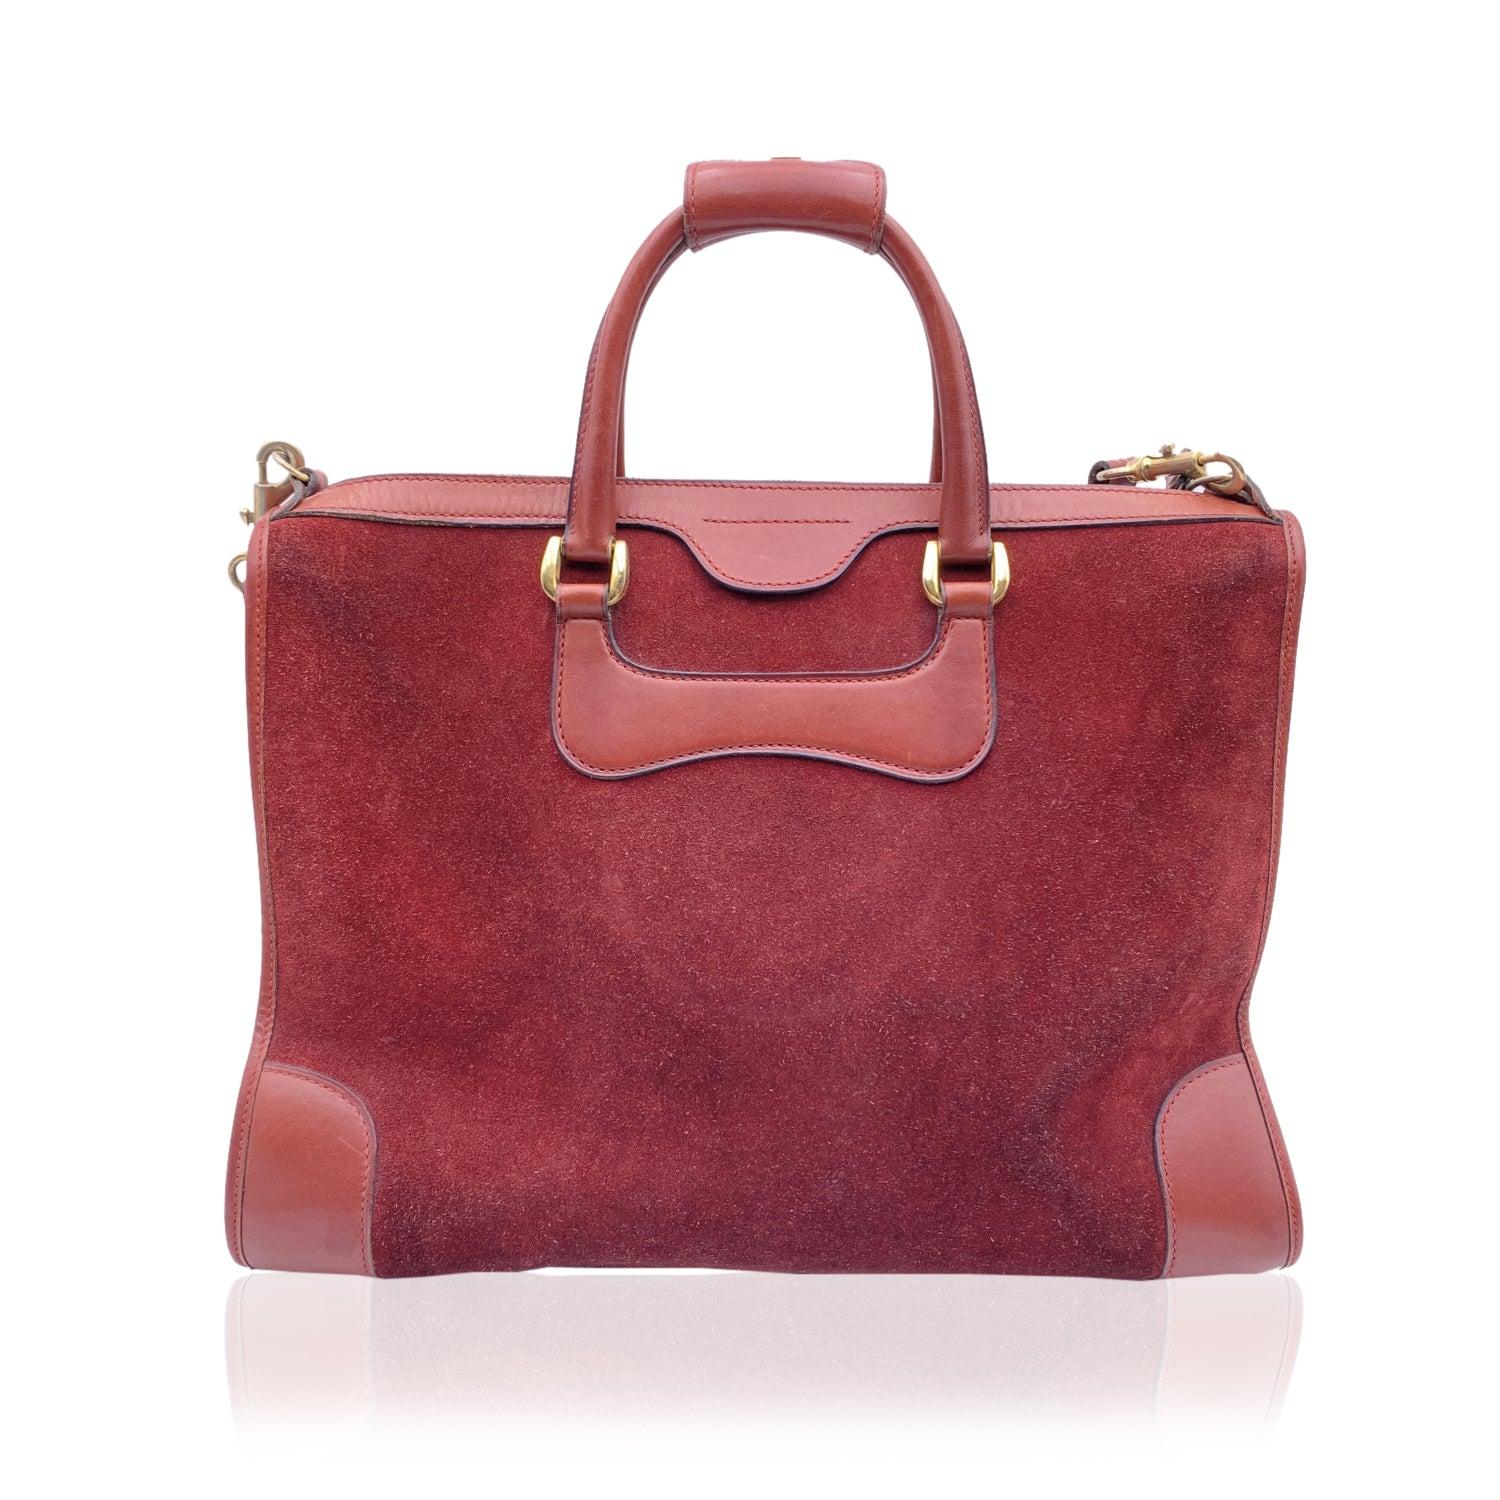 Brown Gucci Vintage Burgundy Suede and Leather Tote Satchel with Strap